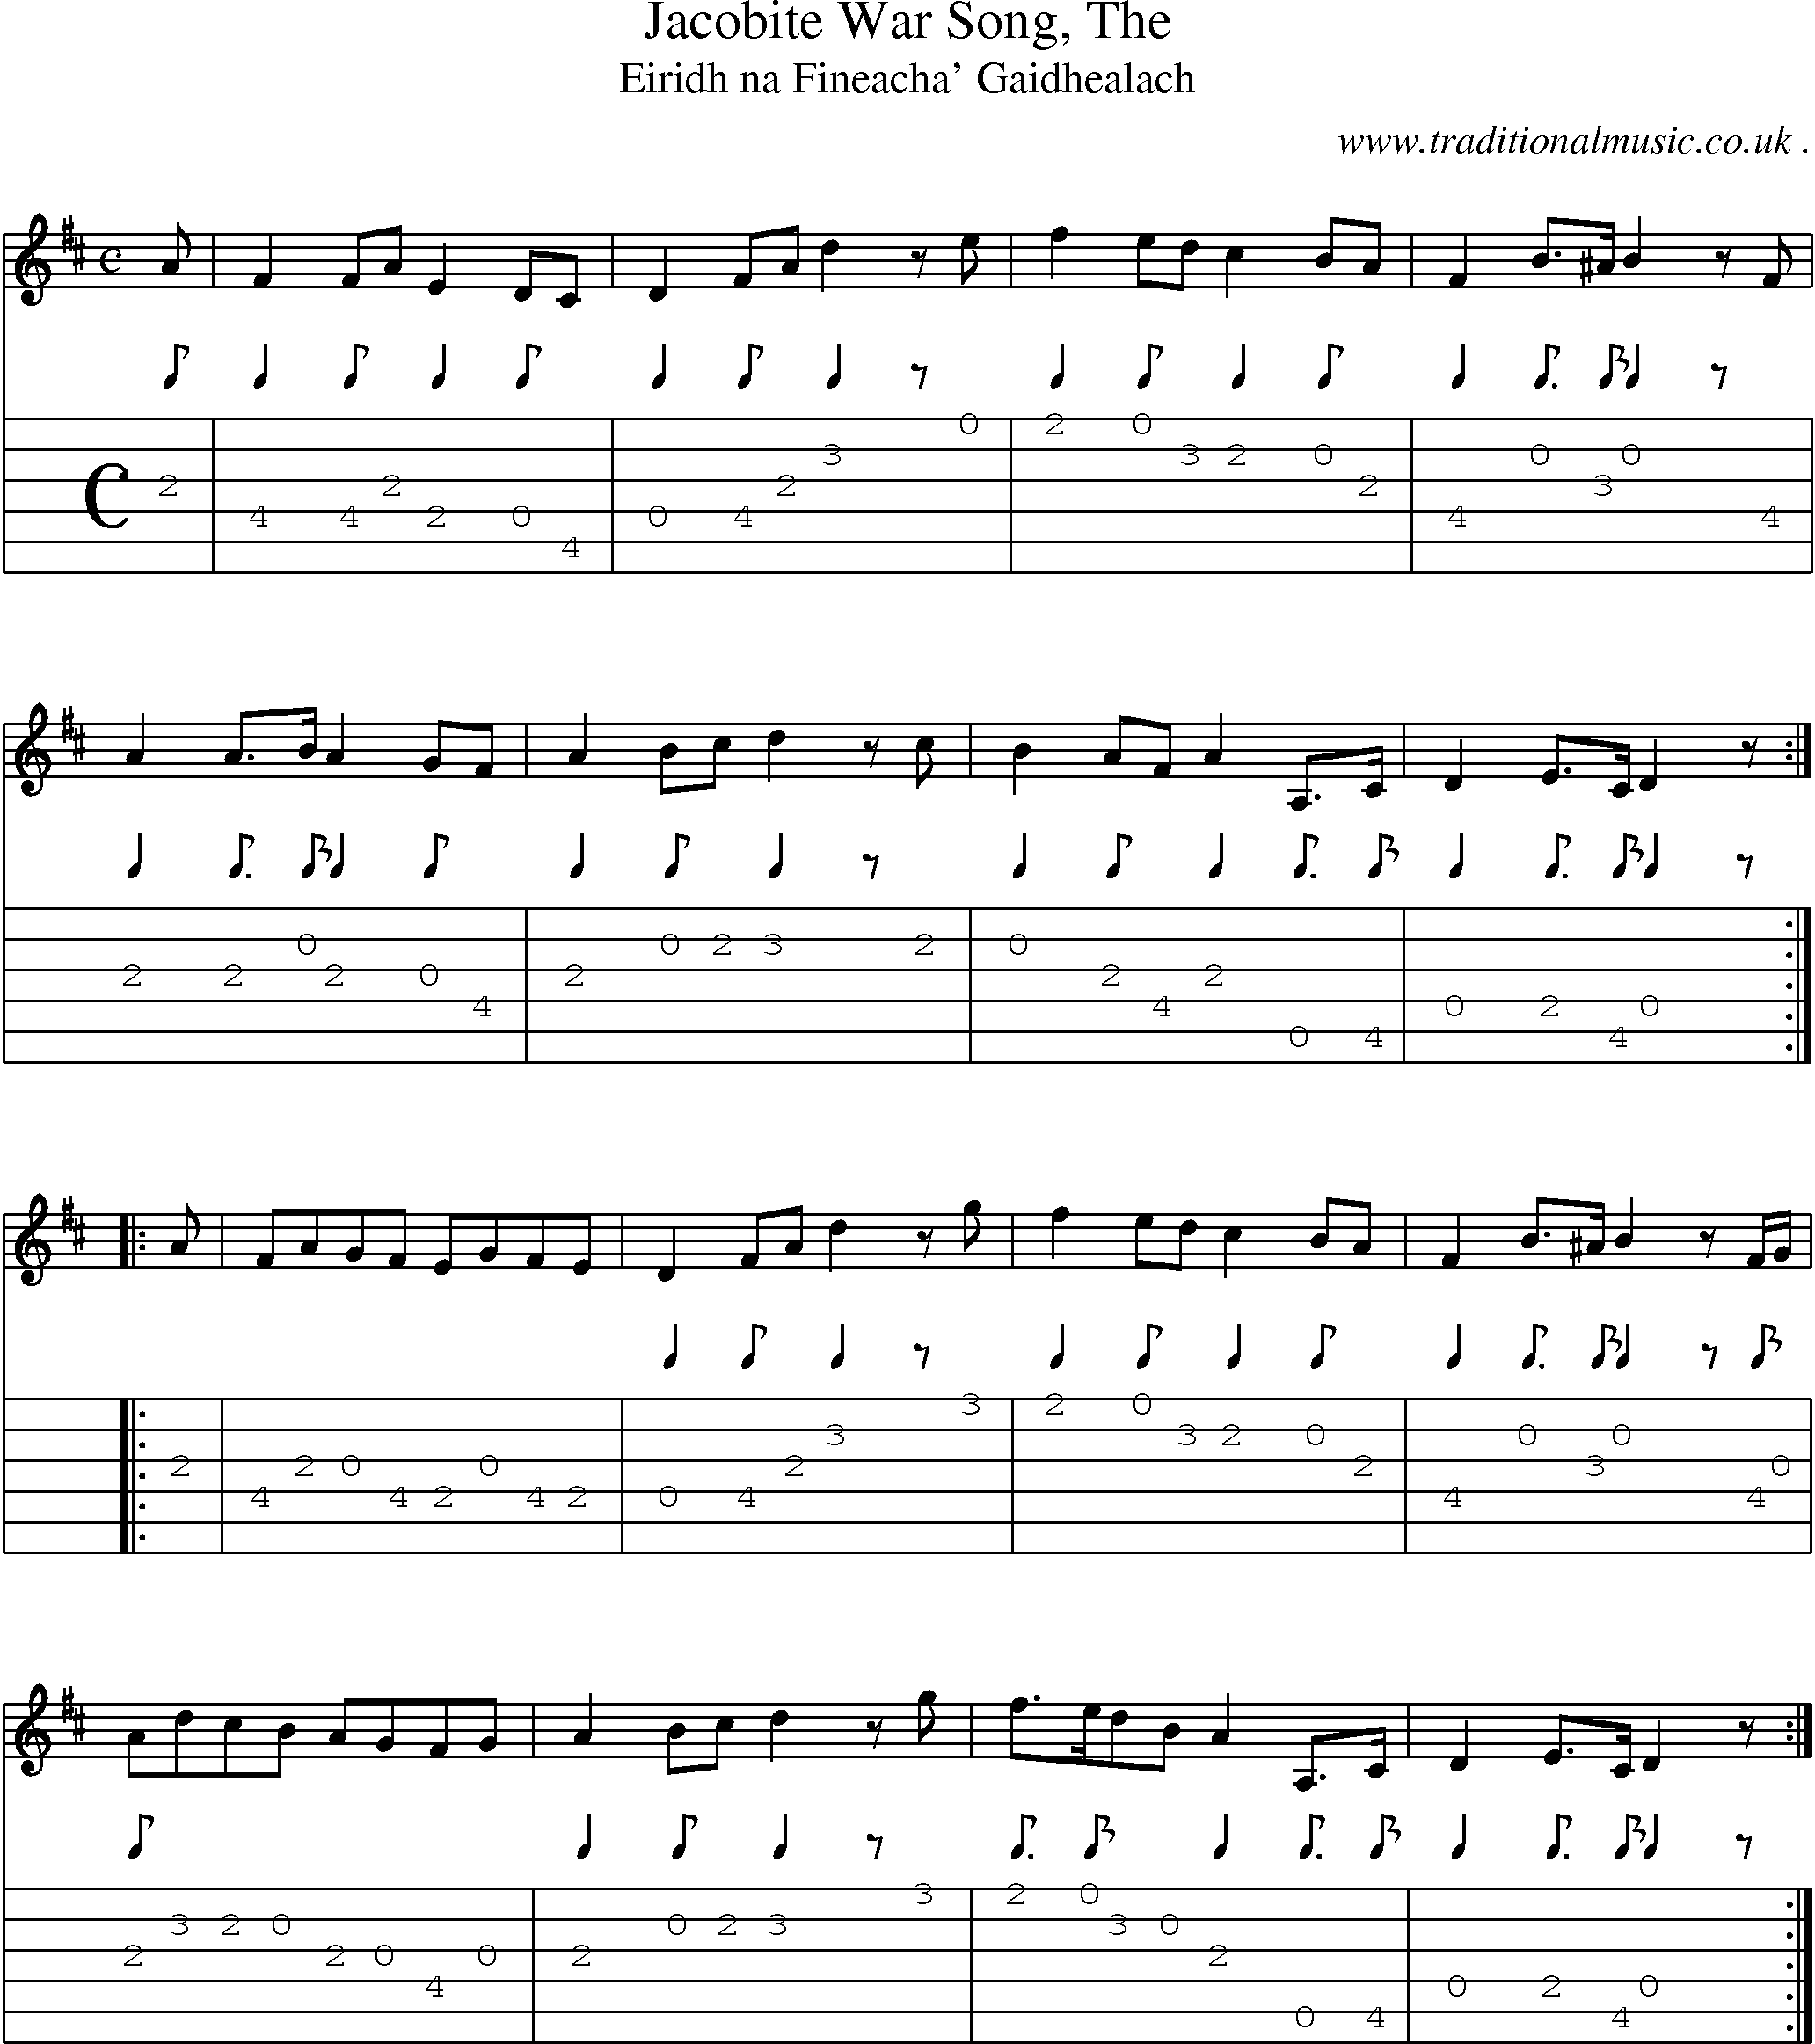 Sheet-music  score, Chords and Guitar Tabs for Jacobite War Song The